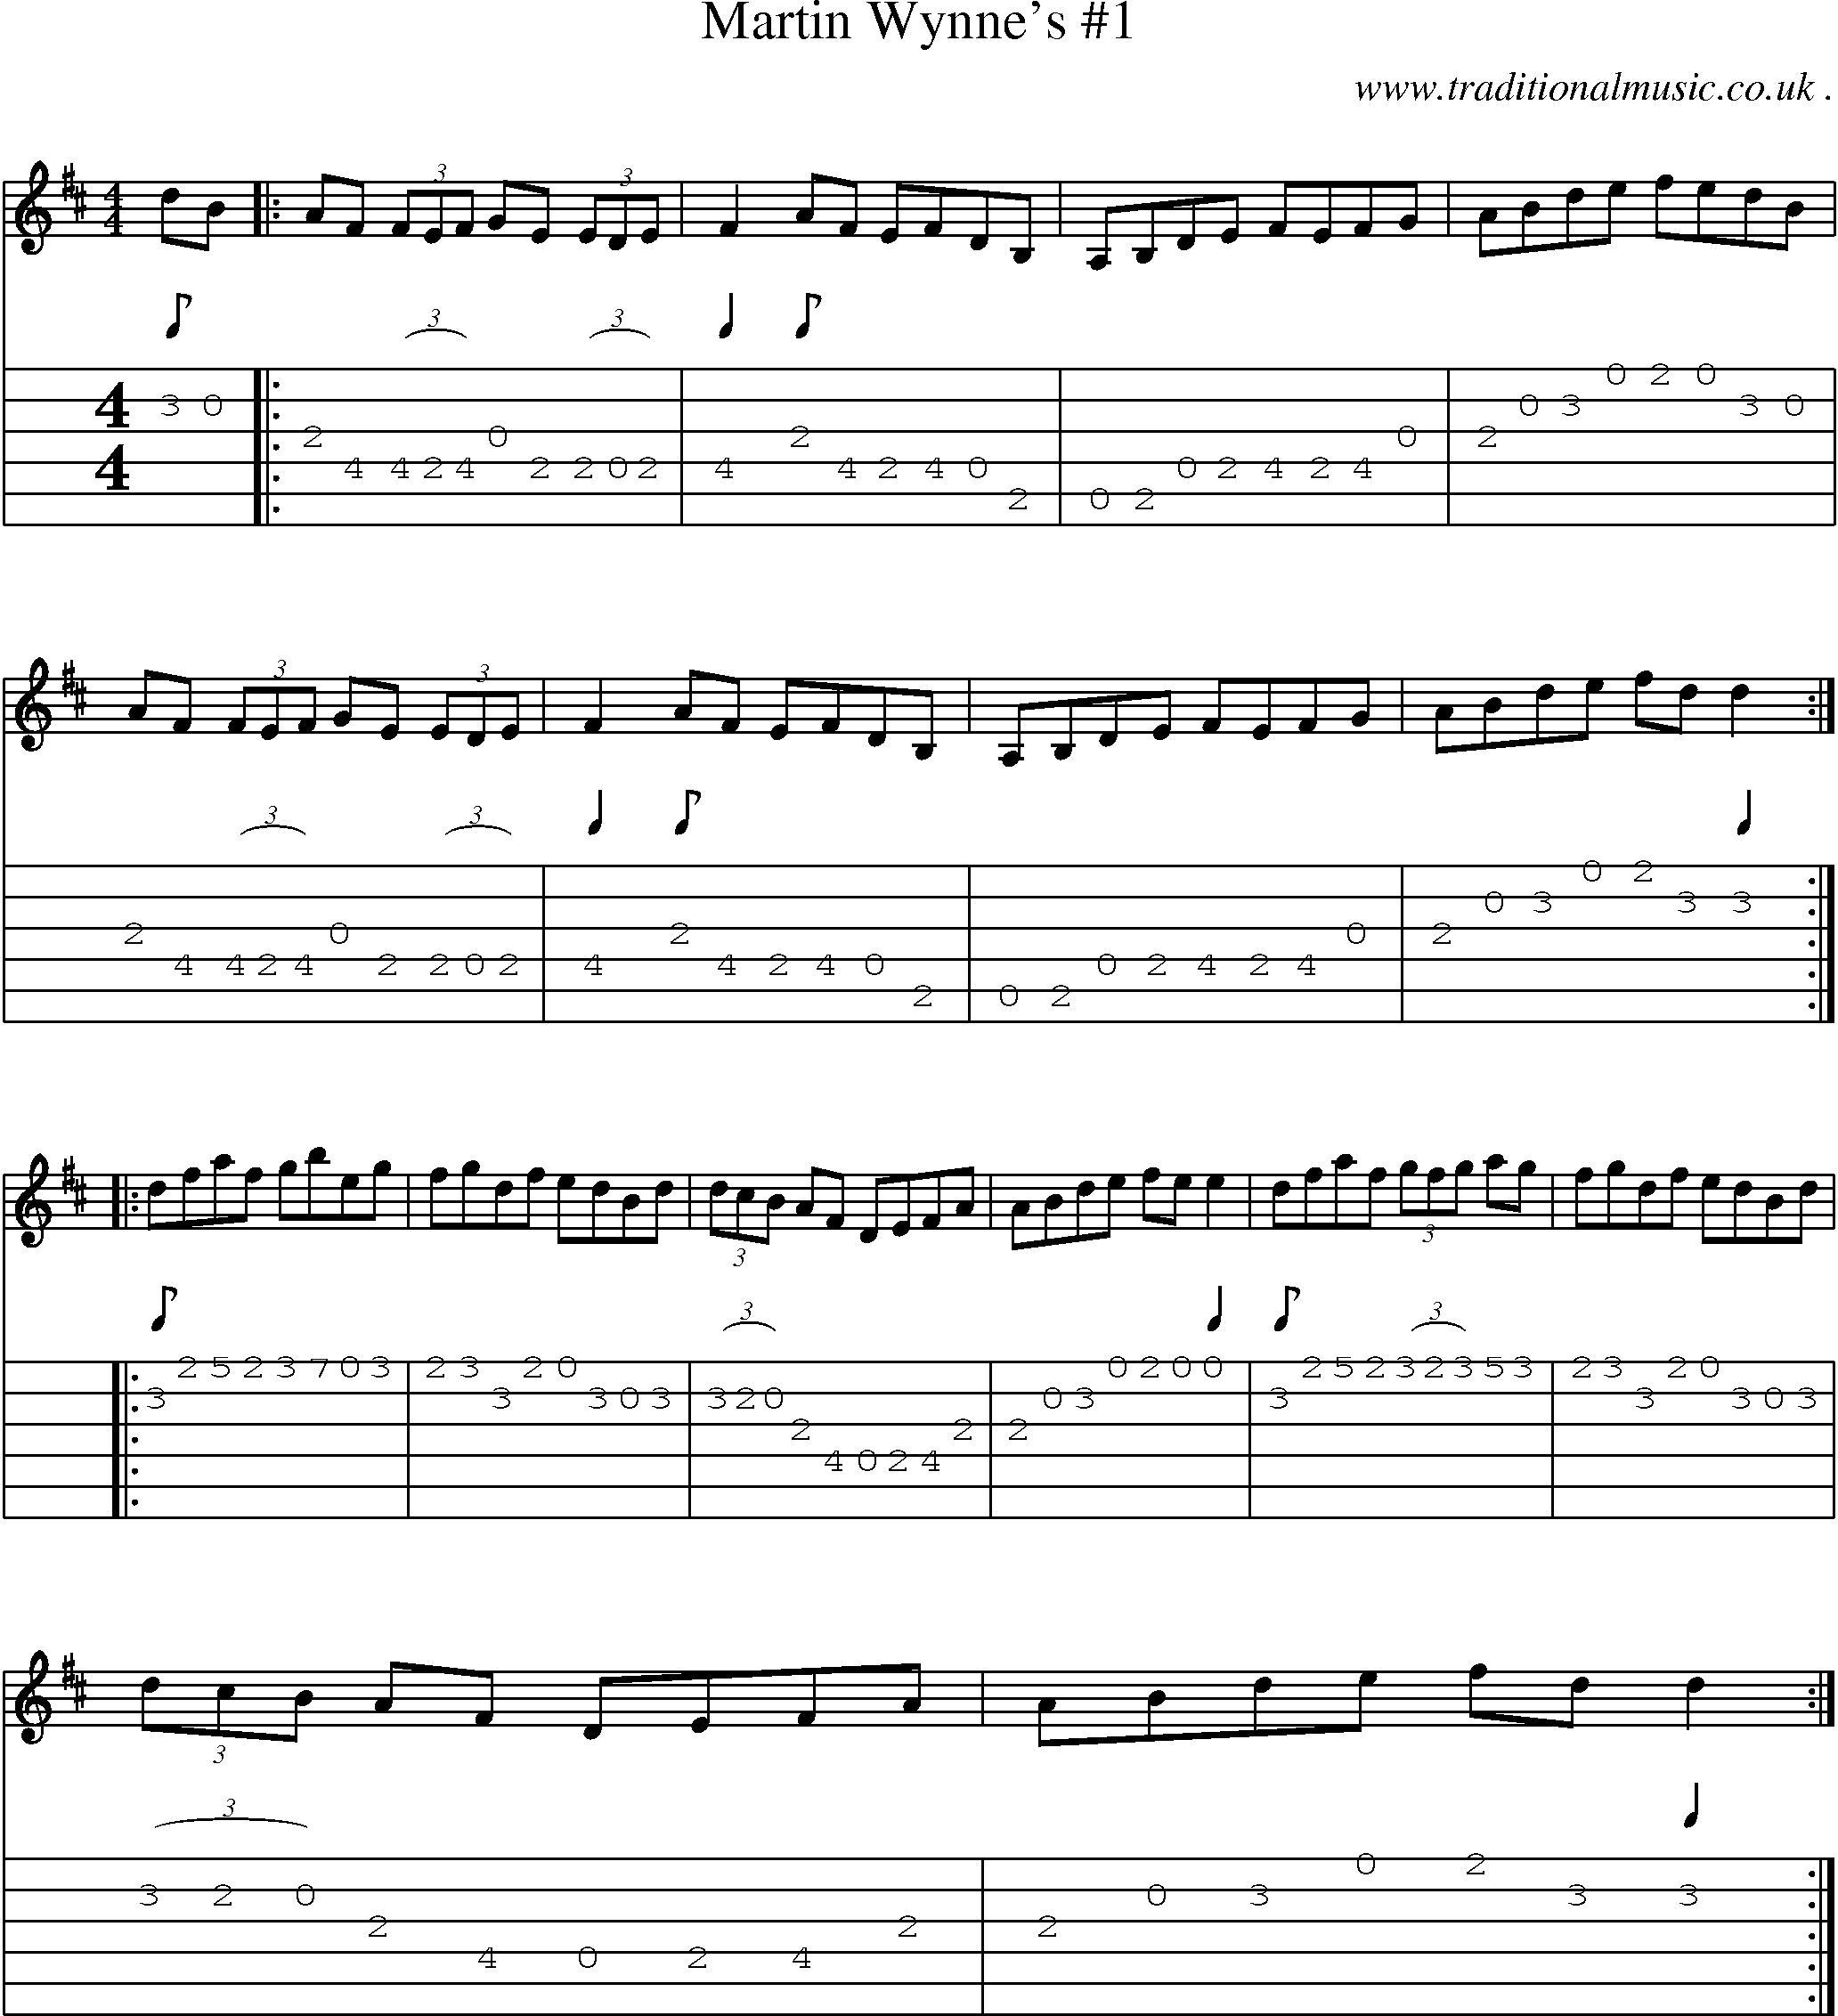 Sheet-Music and Guitar Tabs for Martin Wynnes 1